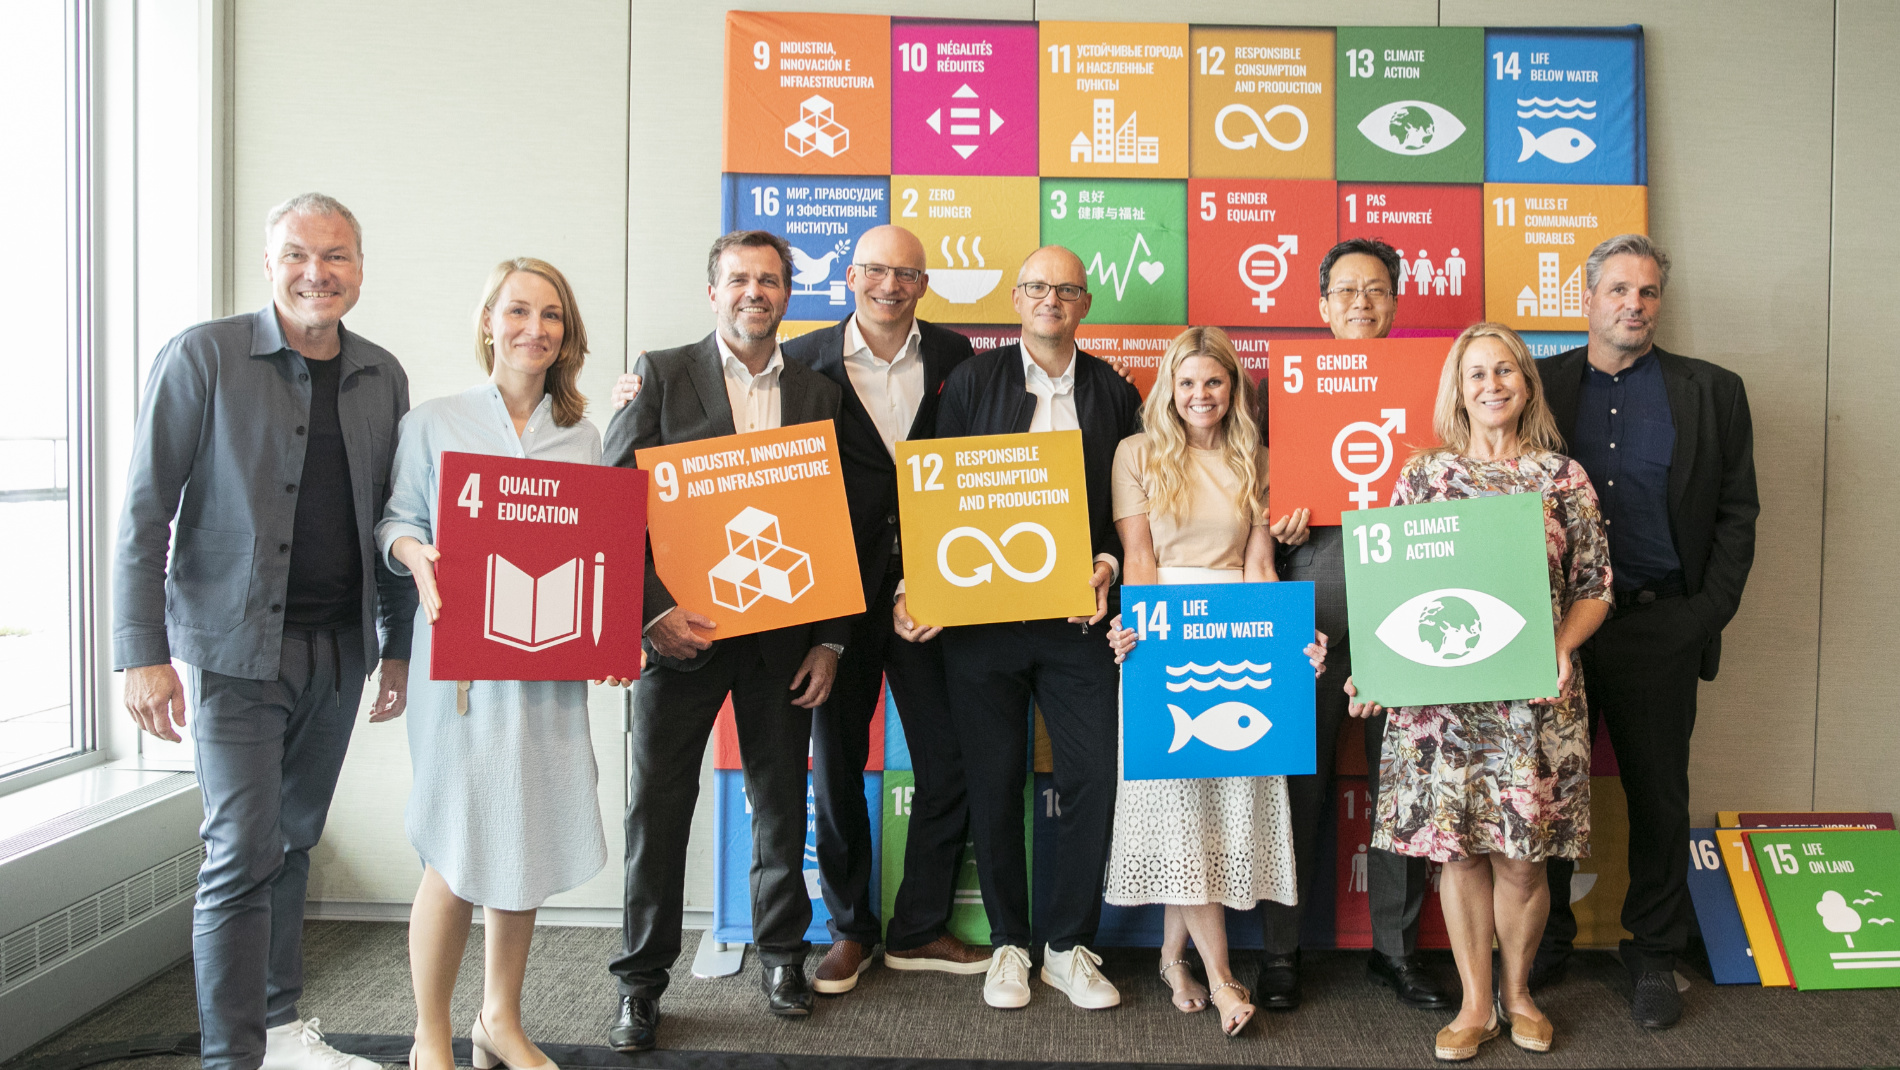 9 people in front of an SDG wall